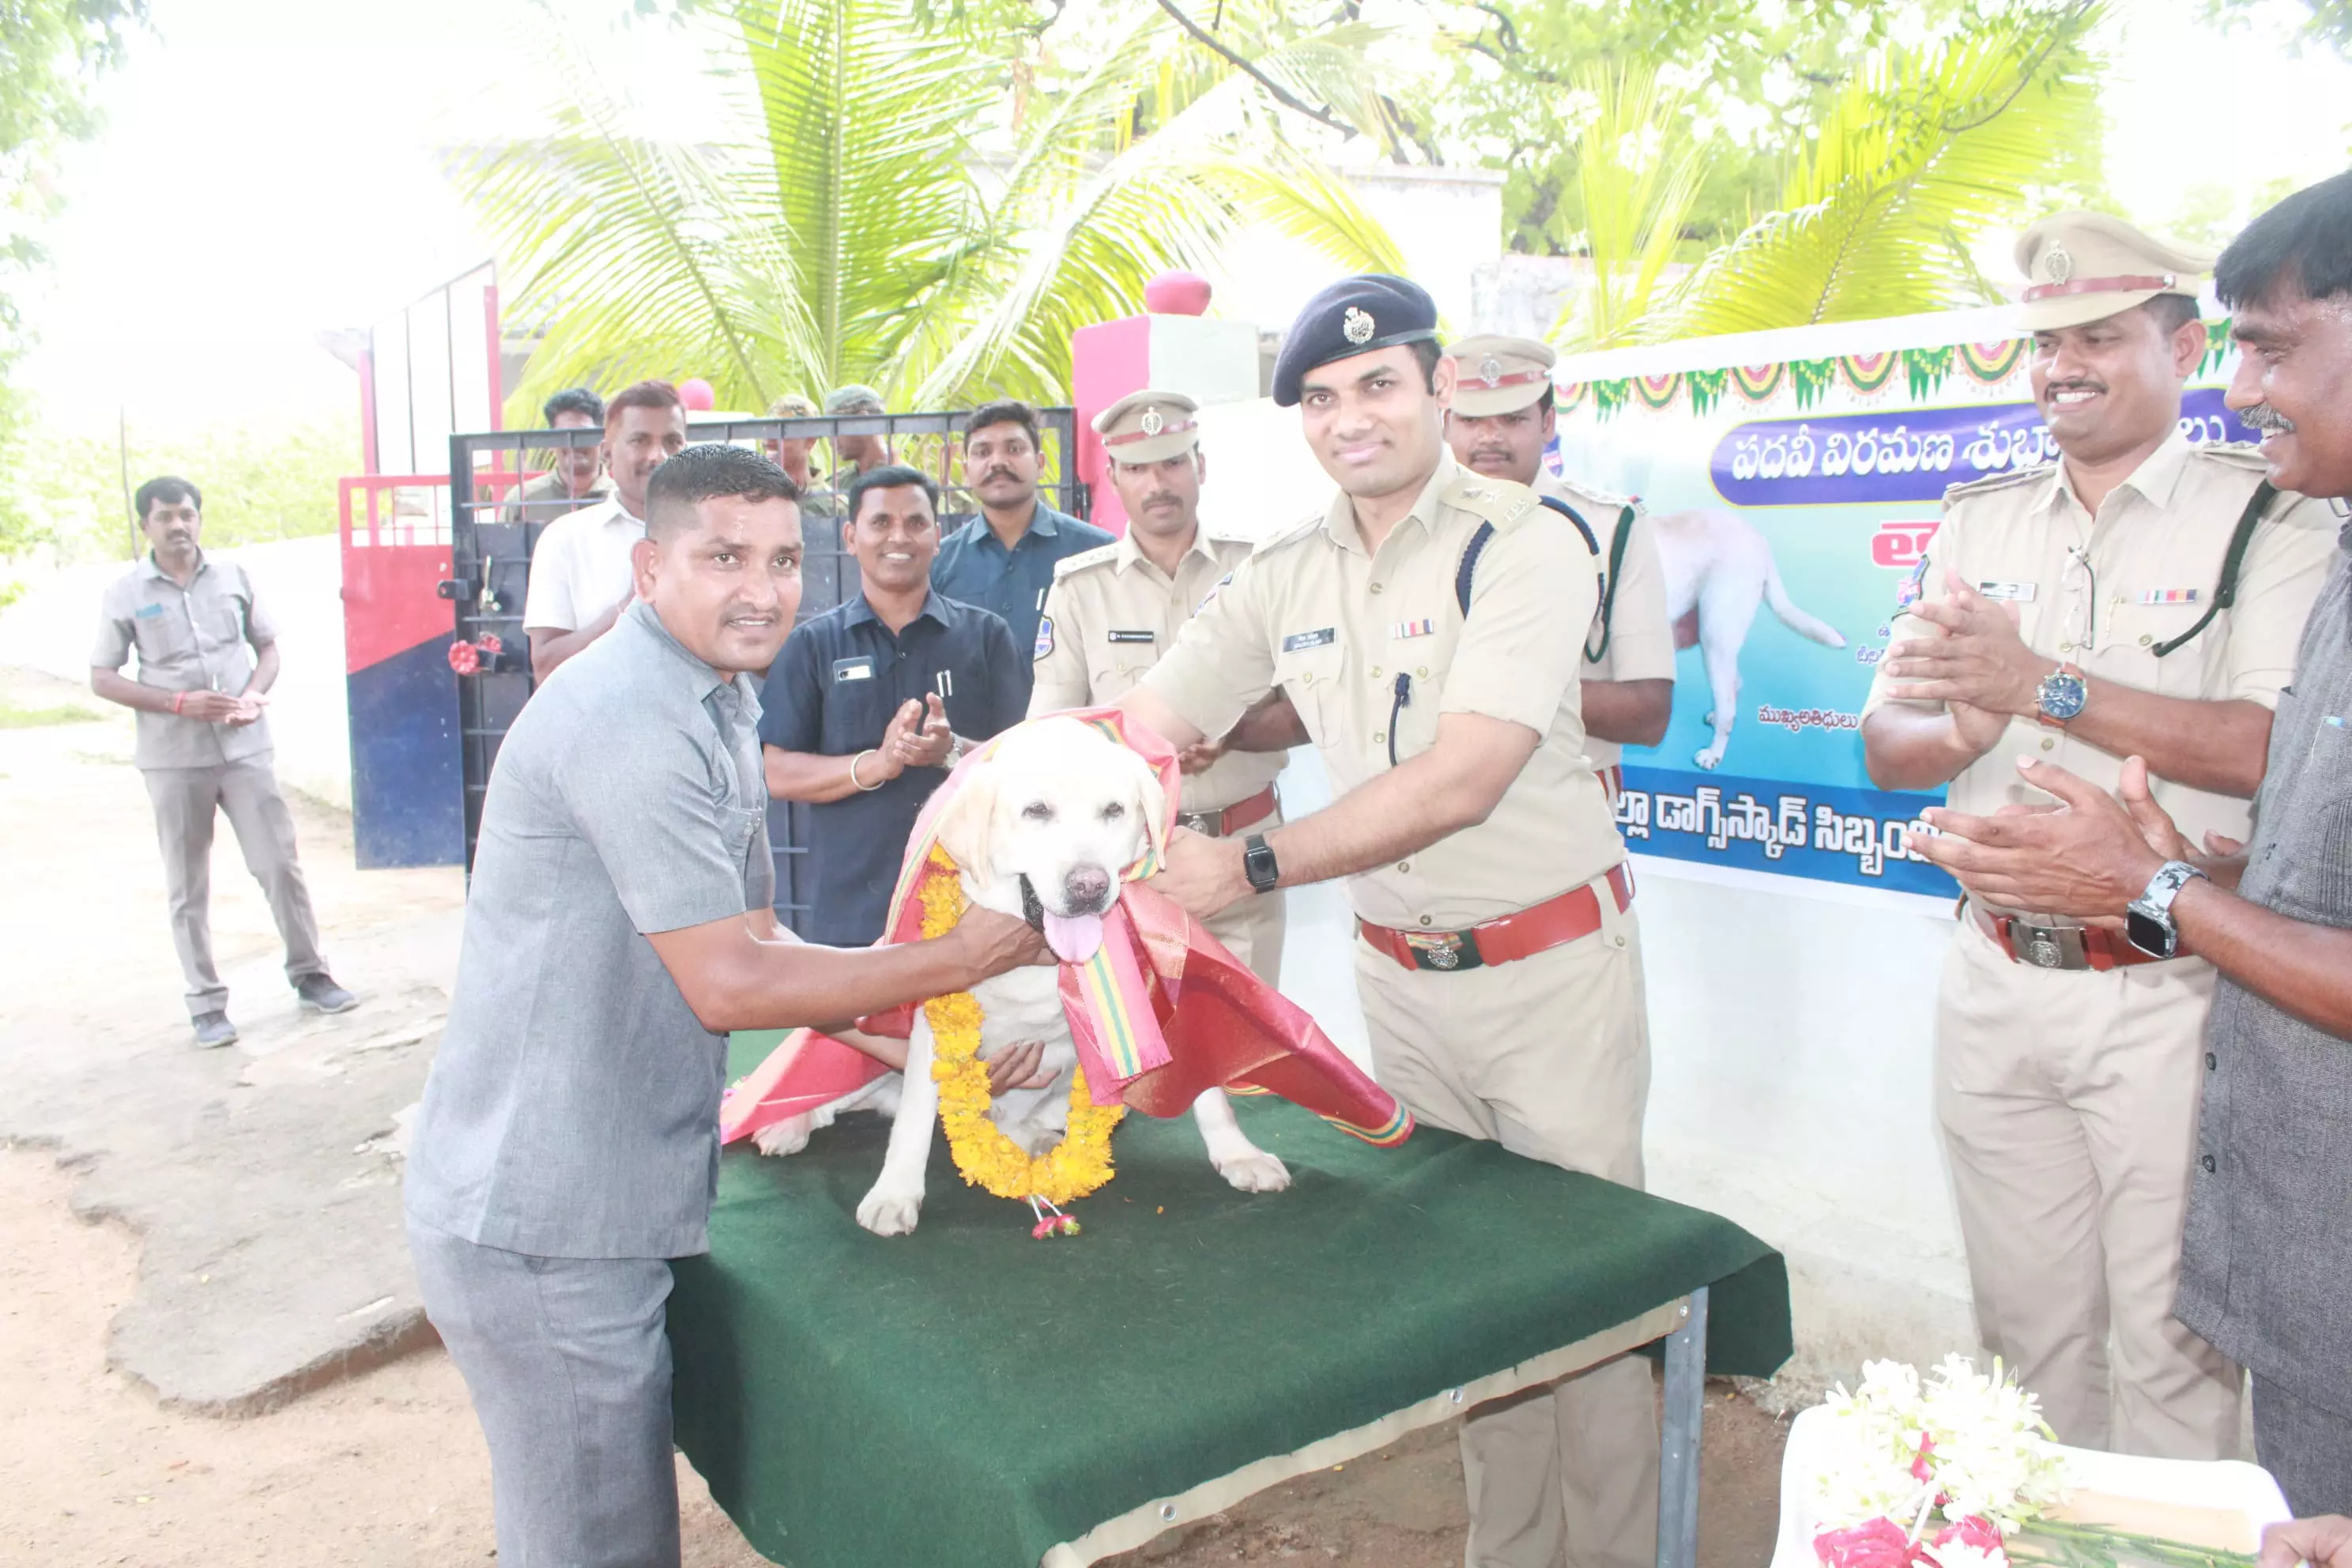 Sniffer Dog Tara Retires After 12 Years, Adilabad Police Host Farewell